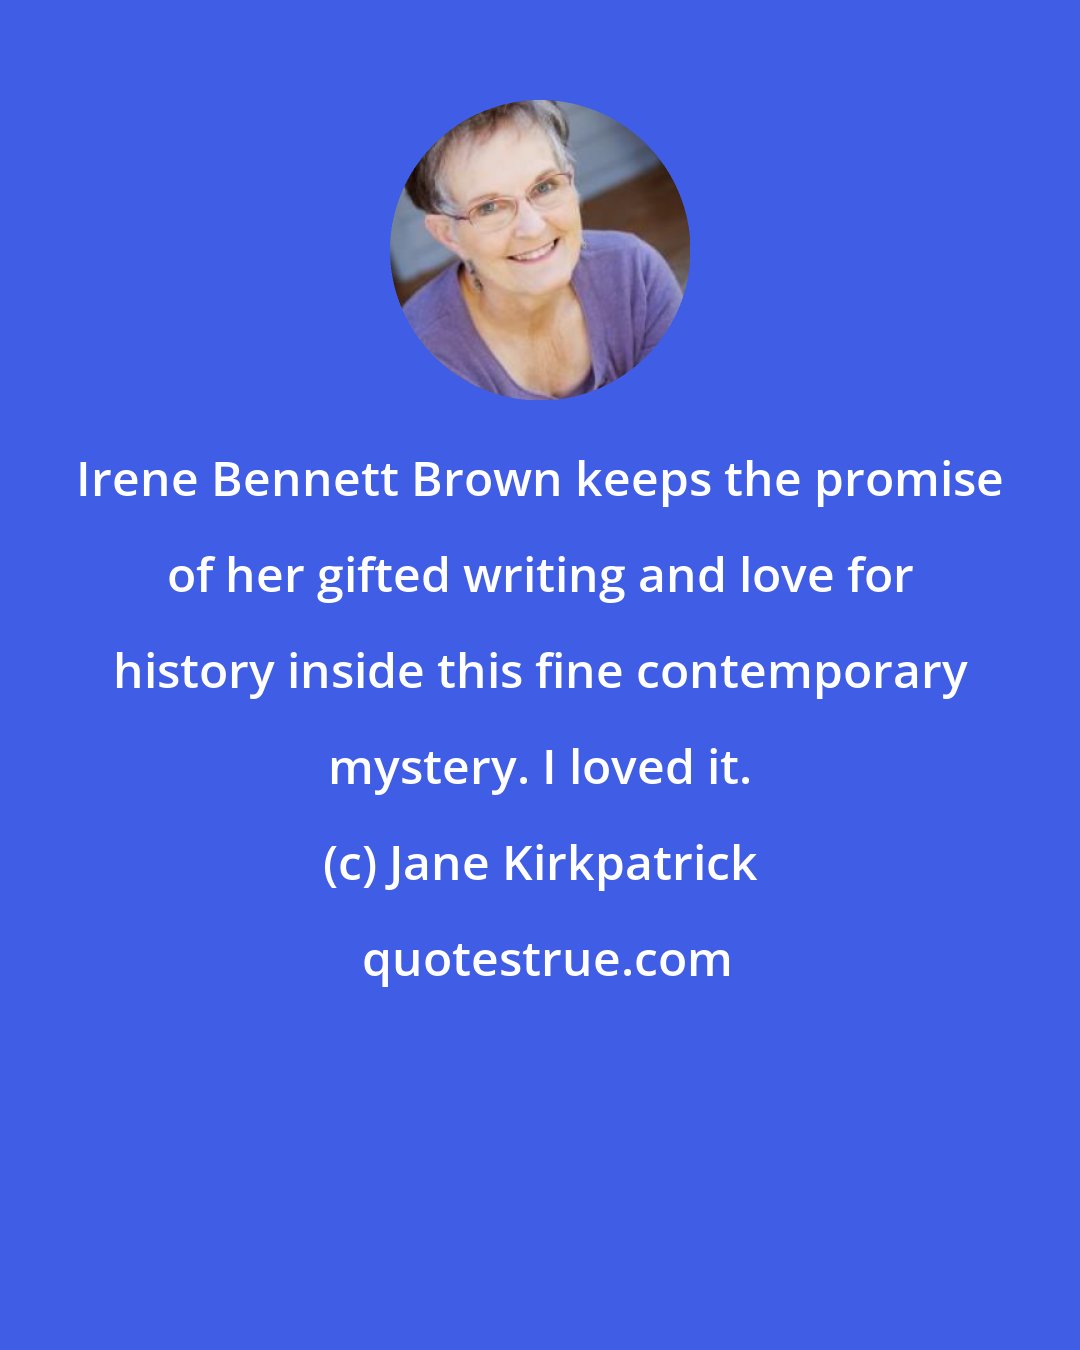 Jane Kirkpatrick: Irene Bennett Brown keeps the promise of her gifted writing and love for history inside this fine contemporary mystery. I loved it.